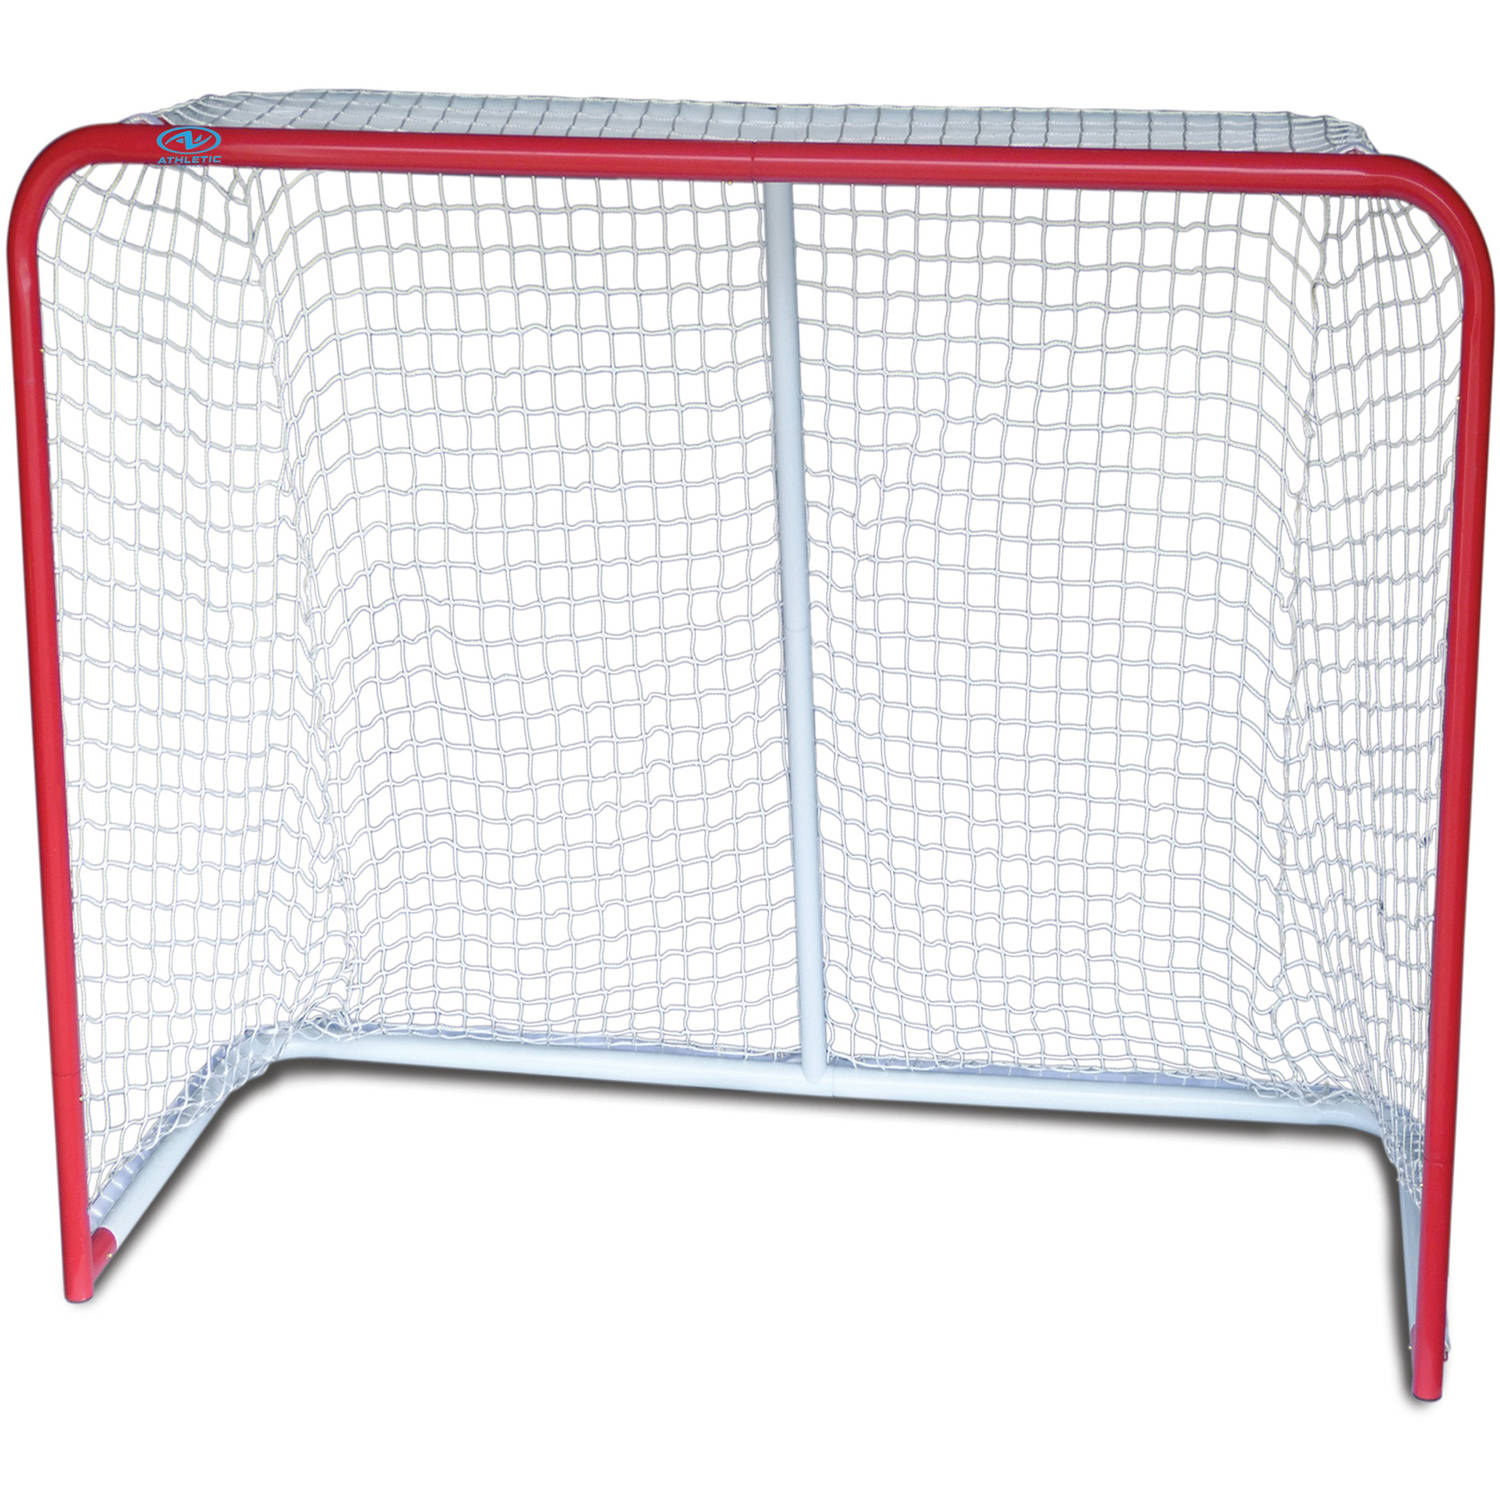 Athletic Works 54" Indoor/Outdoor Steel Hockey Goal with Polyester Net - image 1 of 2